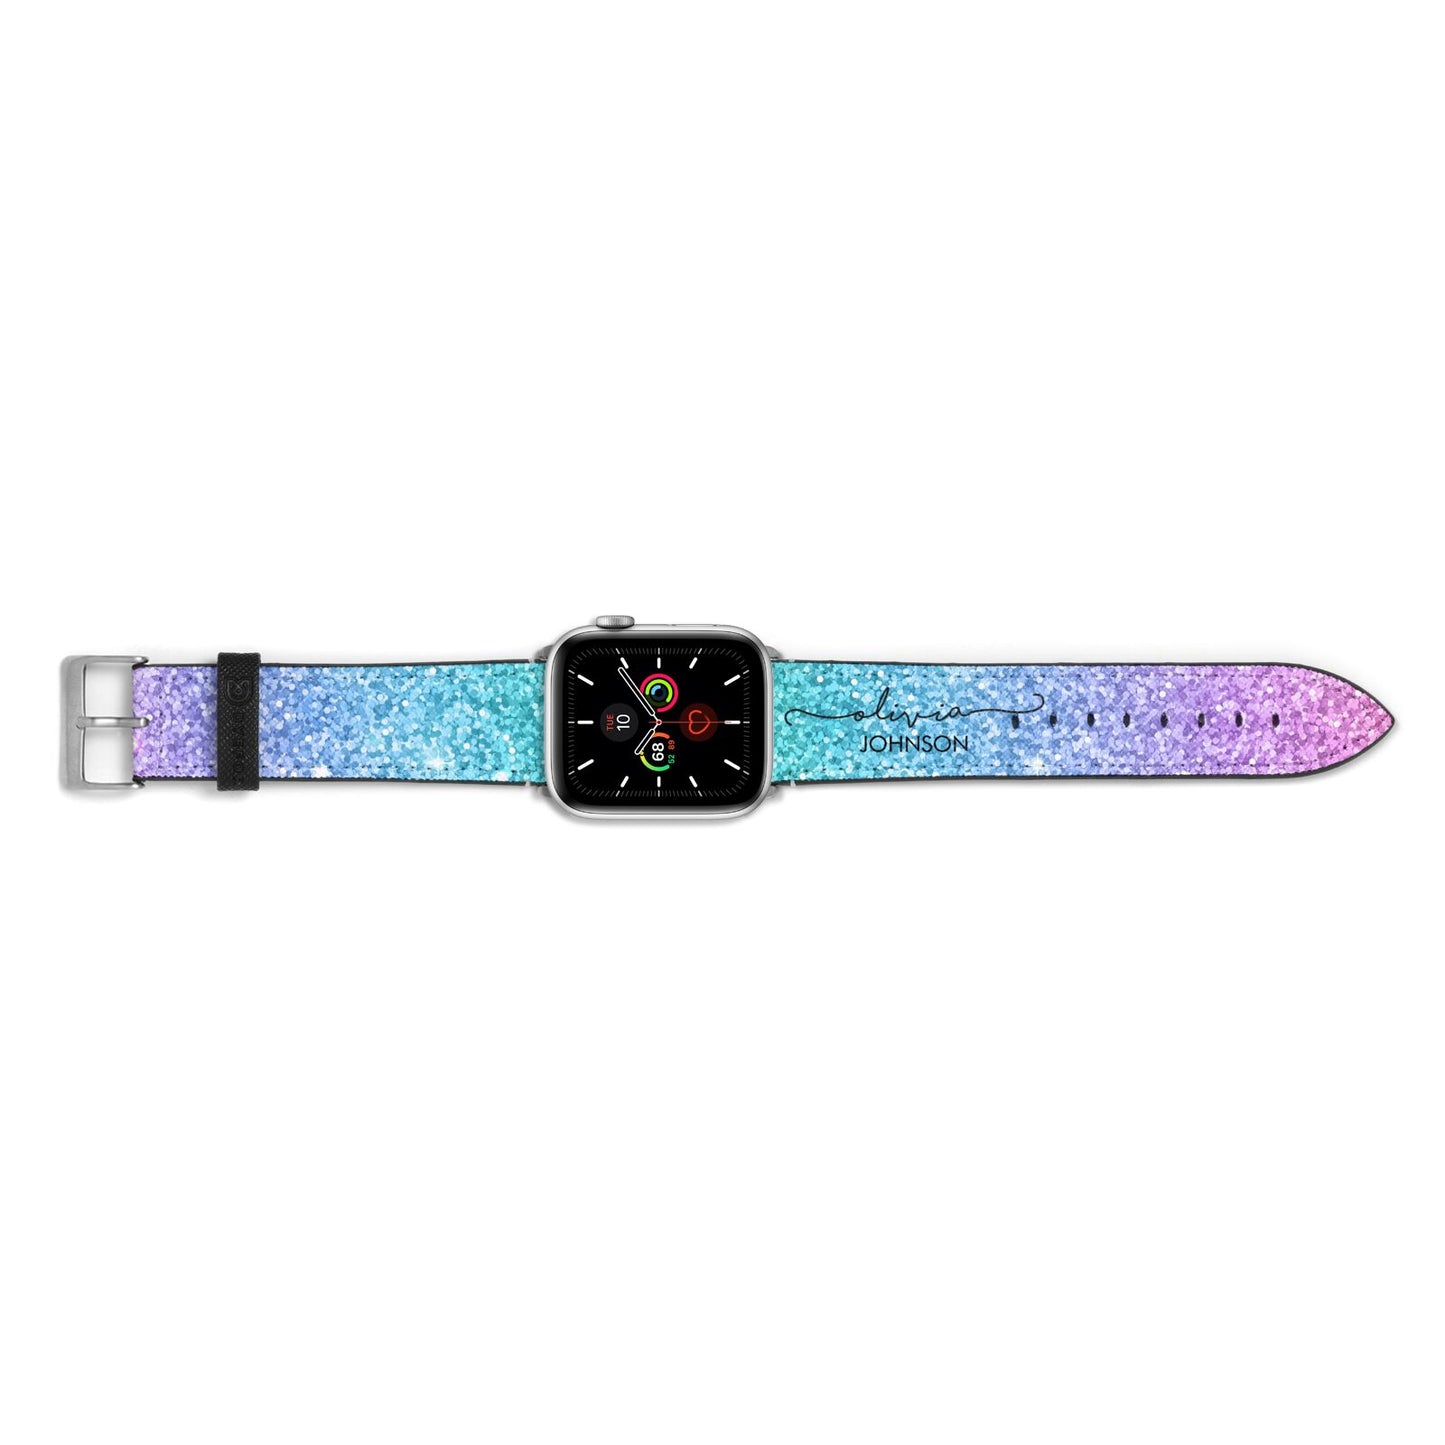 Personalised Ombre Glitter with Names Apple Watch Strap Landscape Image Silver Hardware